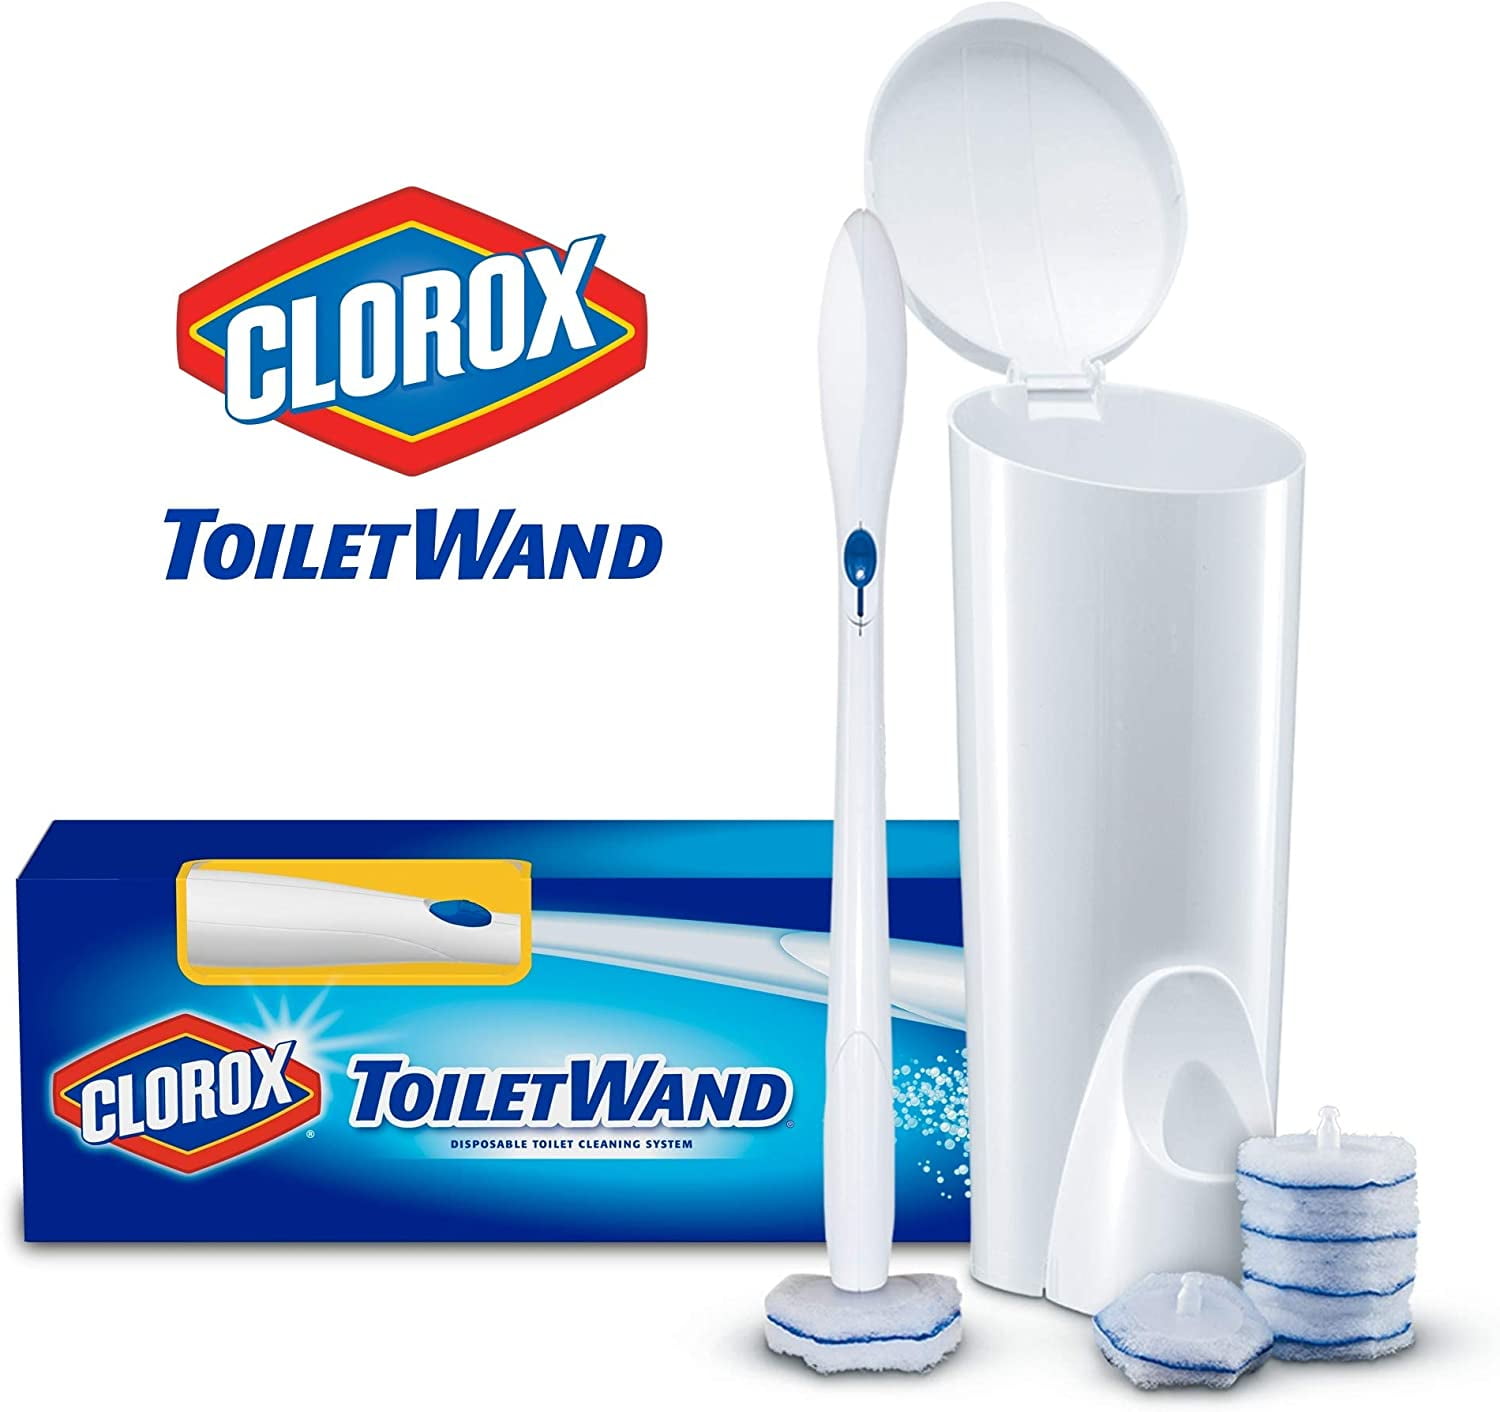 Clorox Toilet Wand Toilet Cleaning, Refills - 10 pads, 1.74 oz